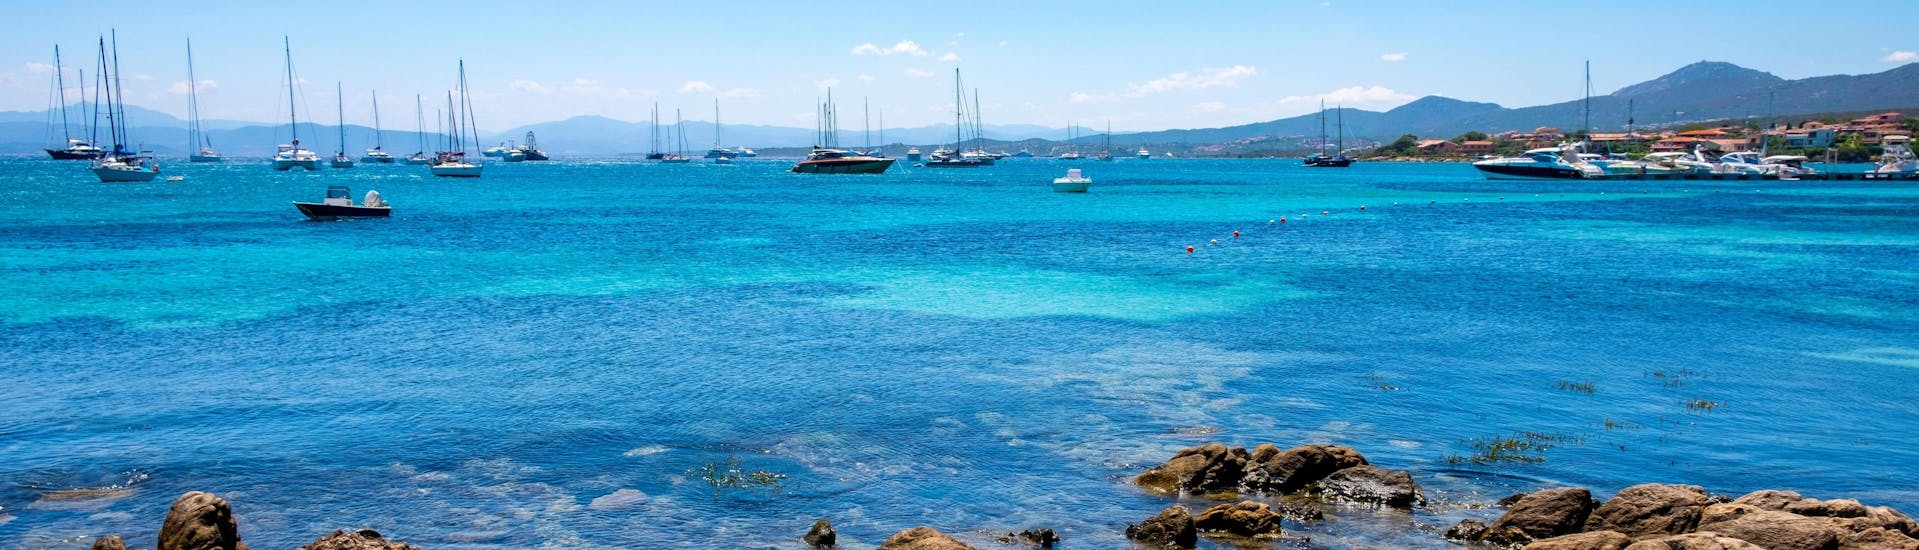 View of Golfo Aranci, a beautiful area of Sardinia that you can discover during a boat trip.